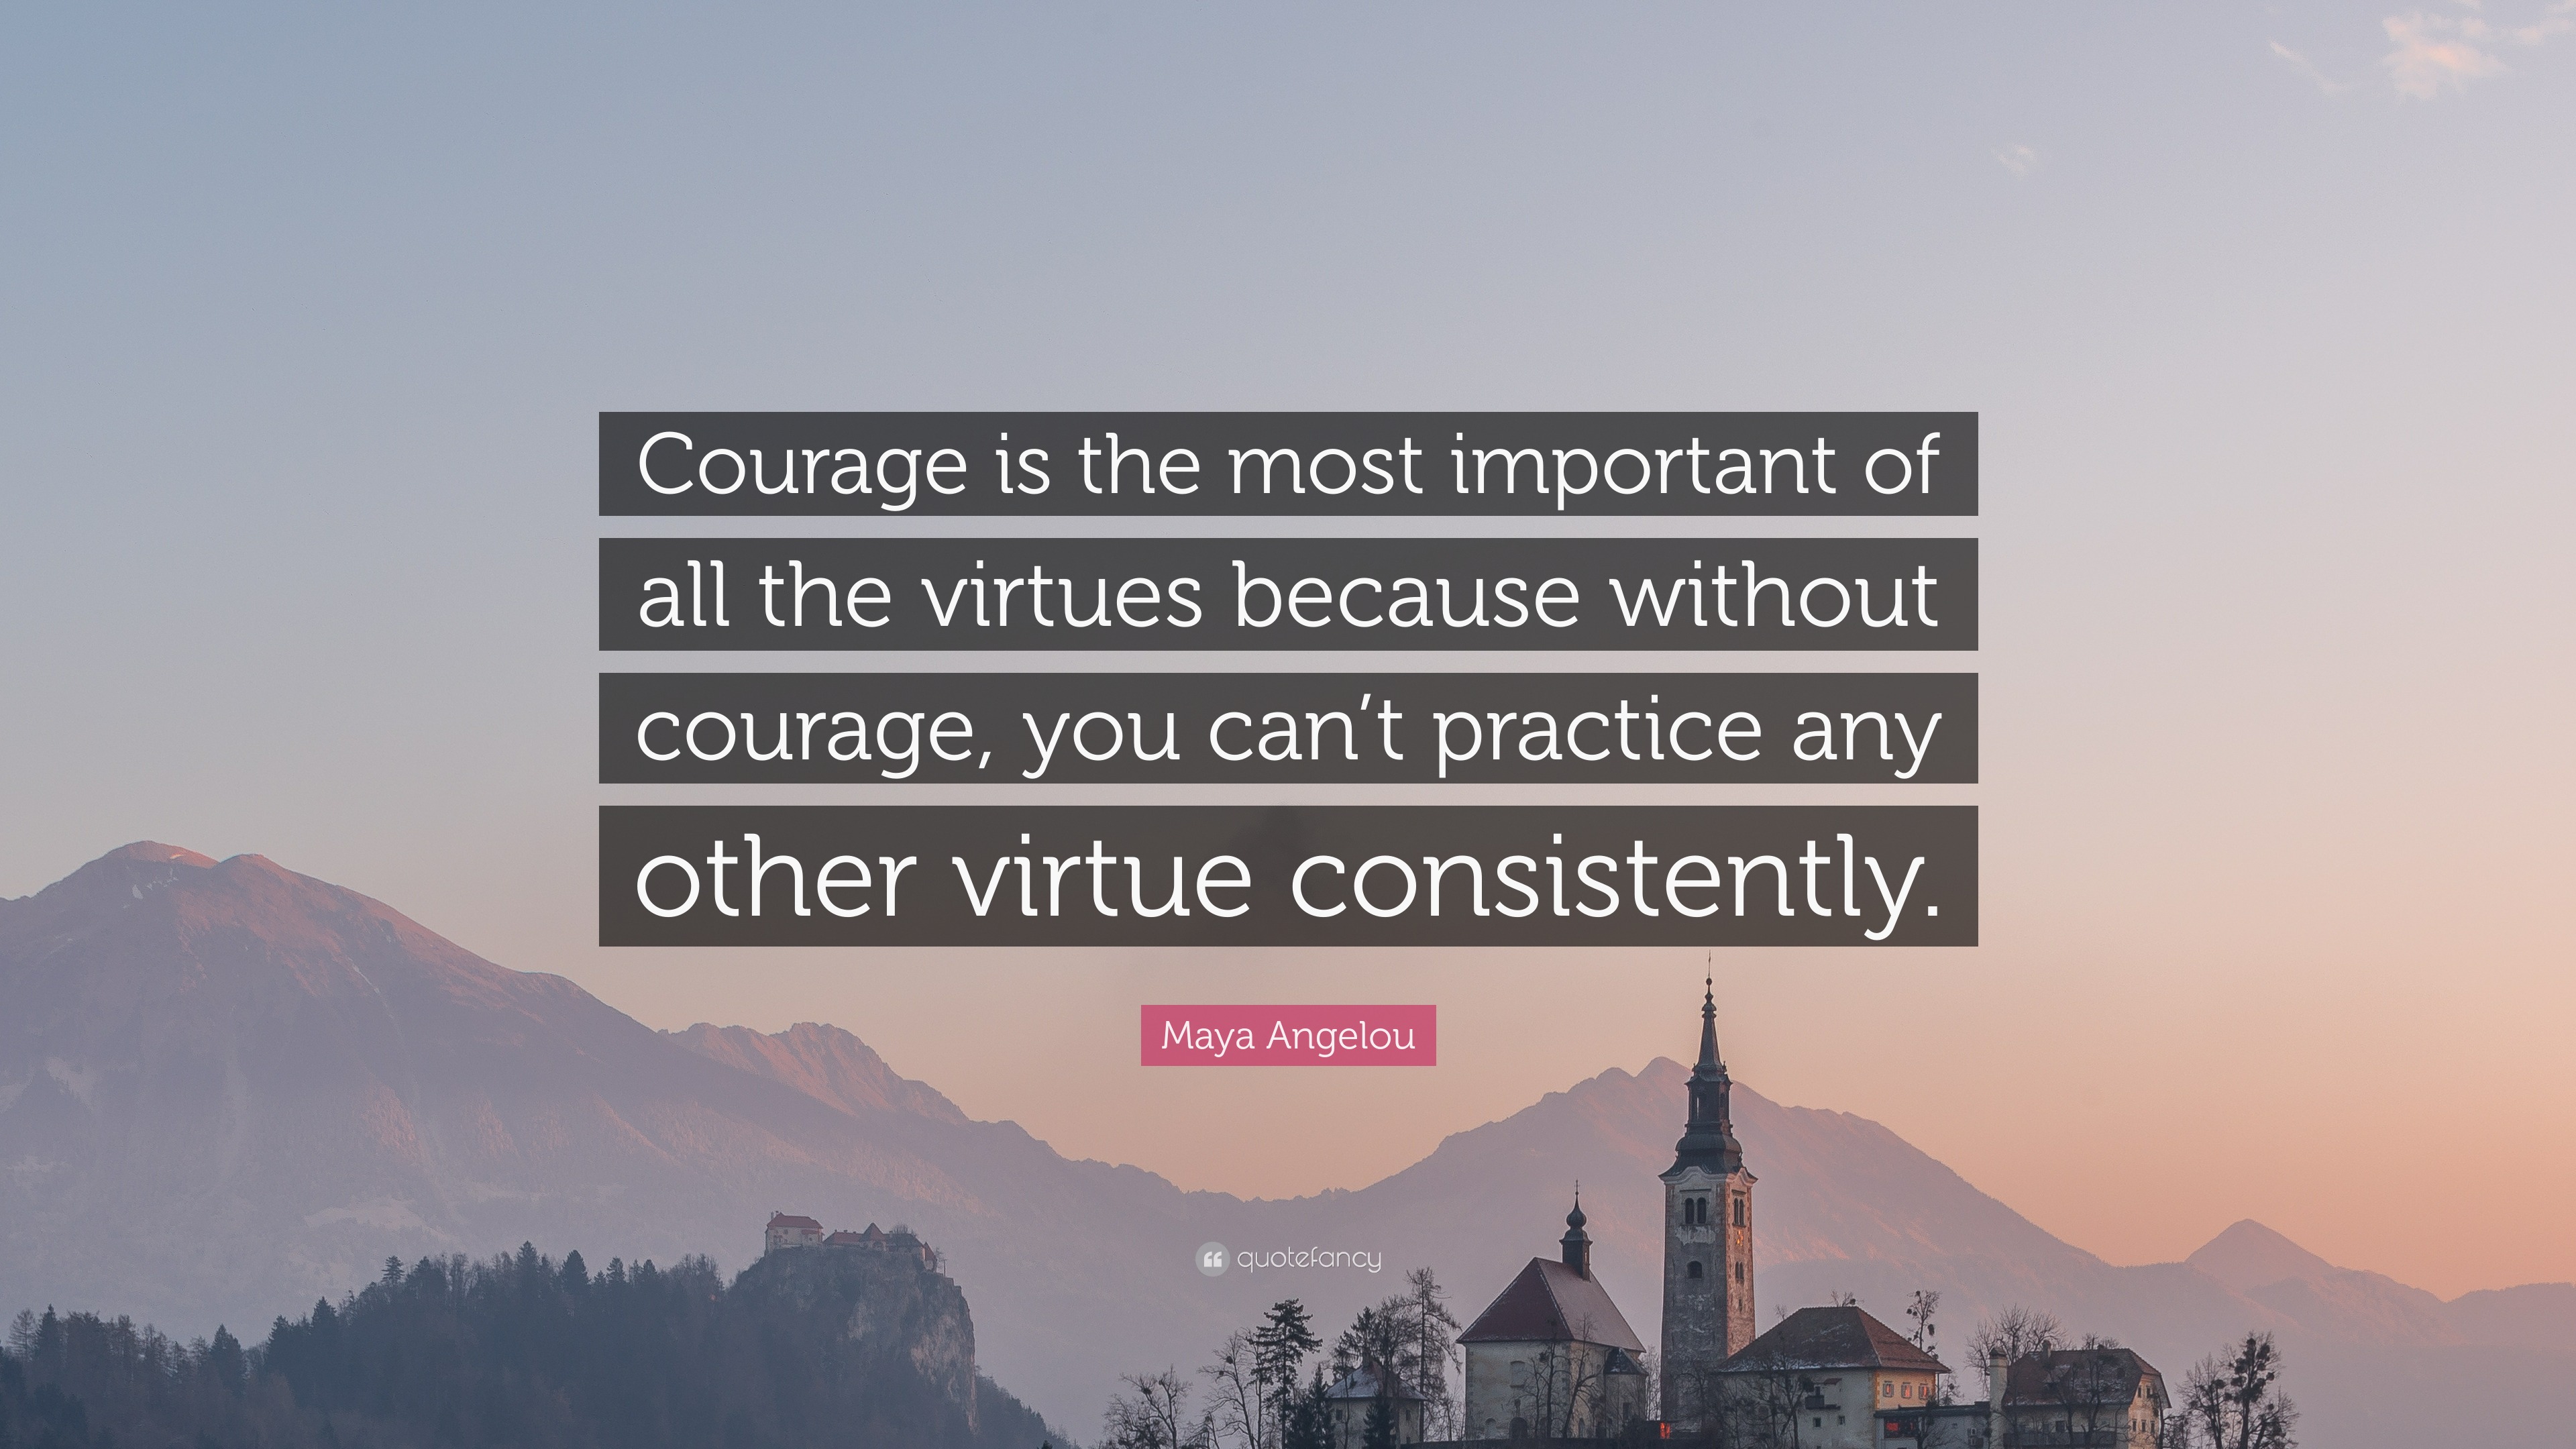 essay on virtue of courage